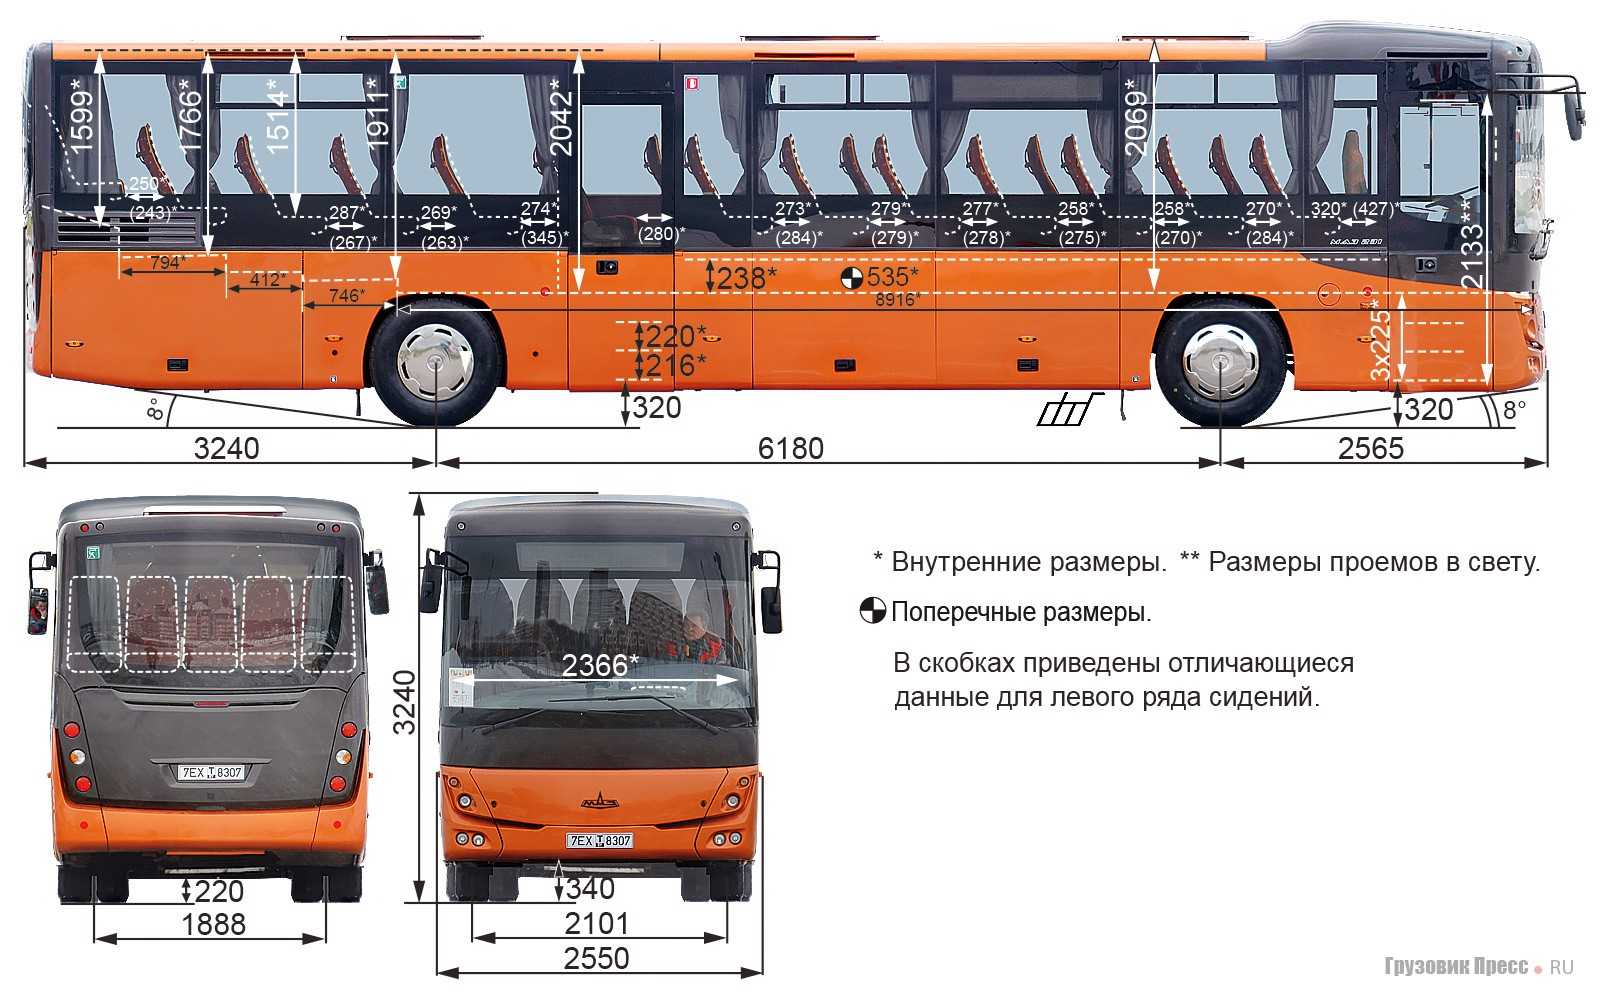 Маз-241